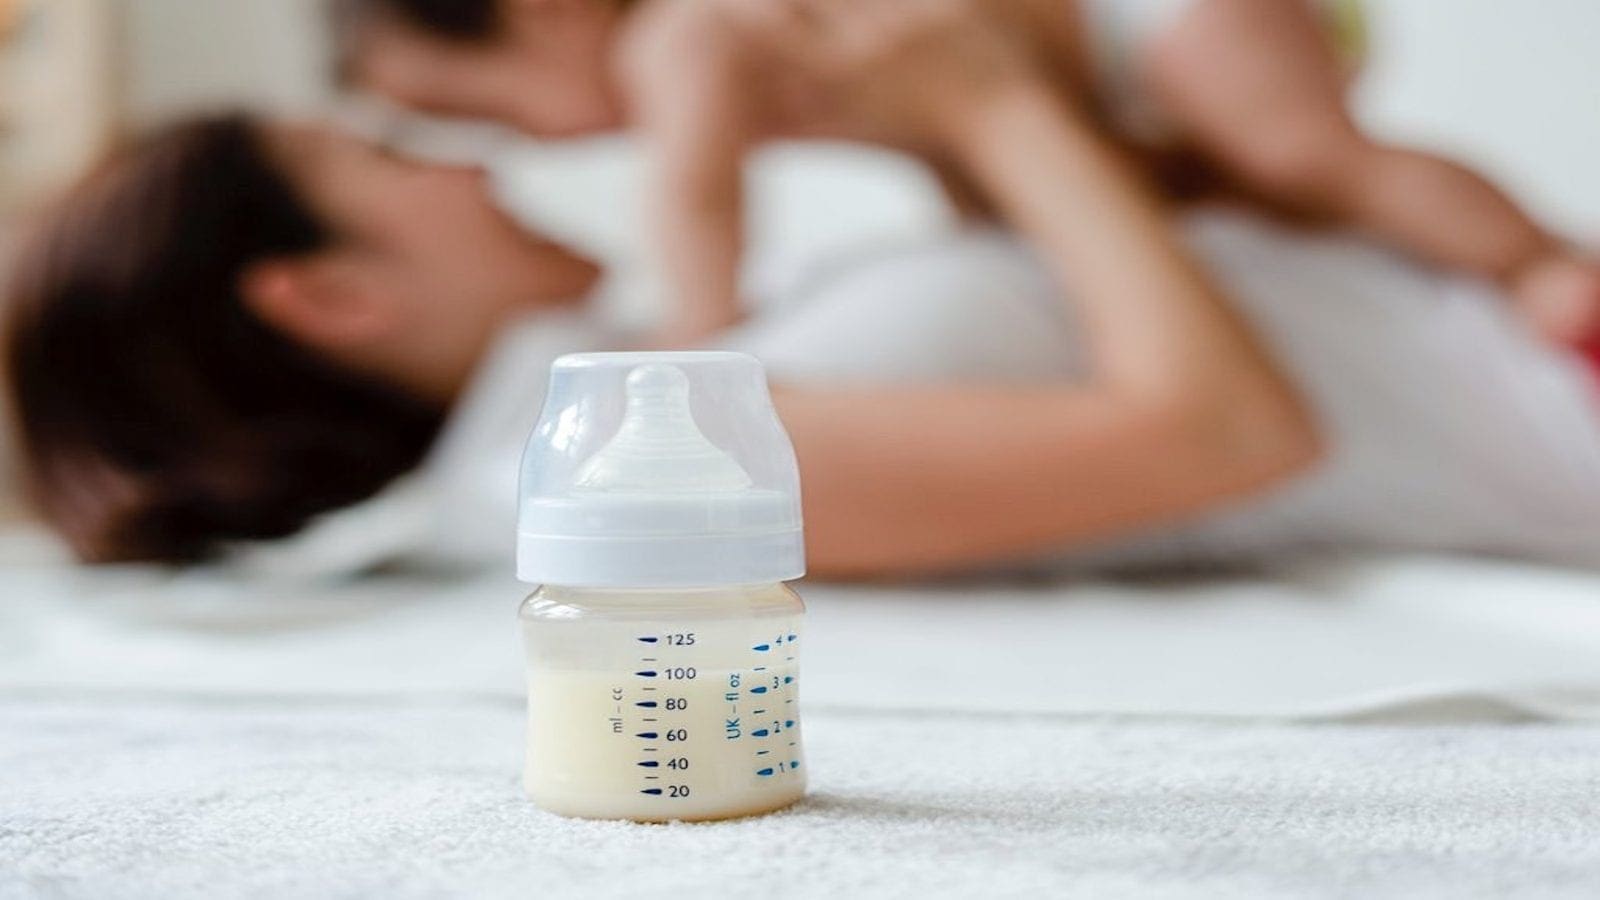 108Labs to build world’s first cell-cultured human milk factory to accelerate growth of sector